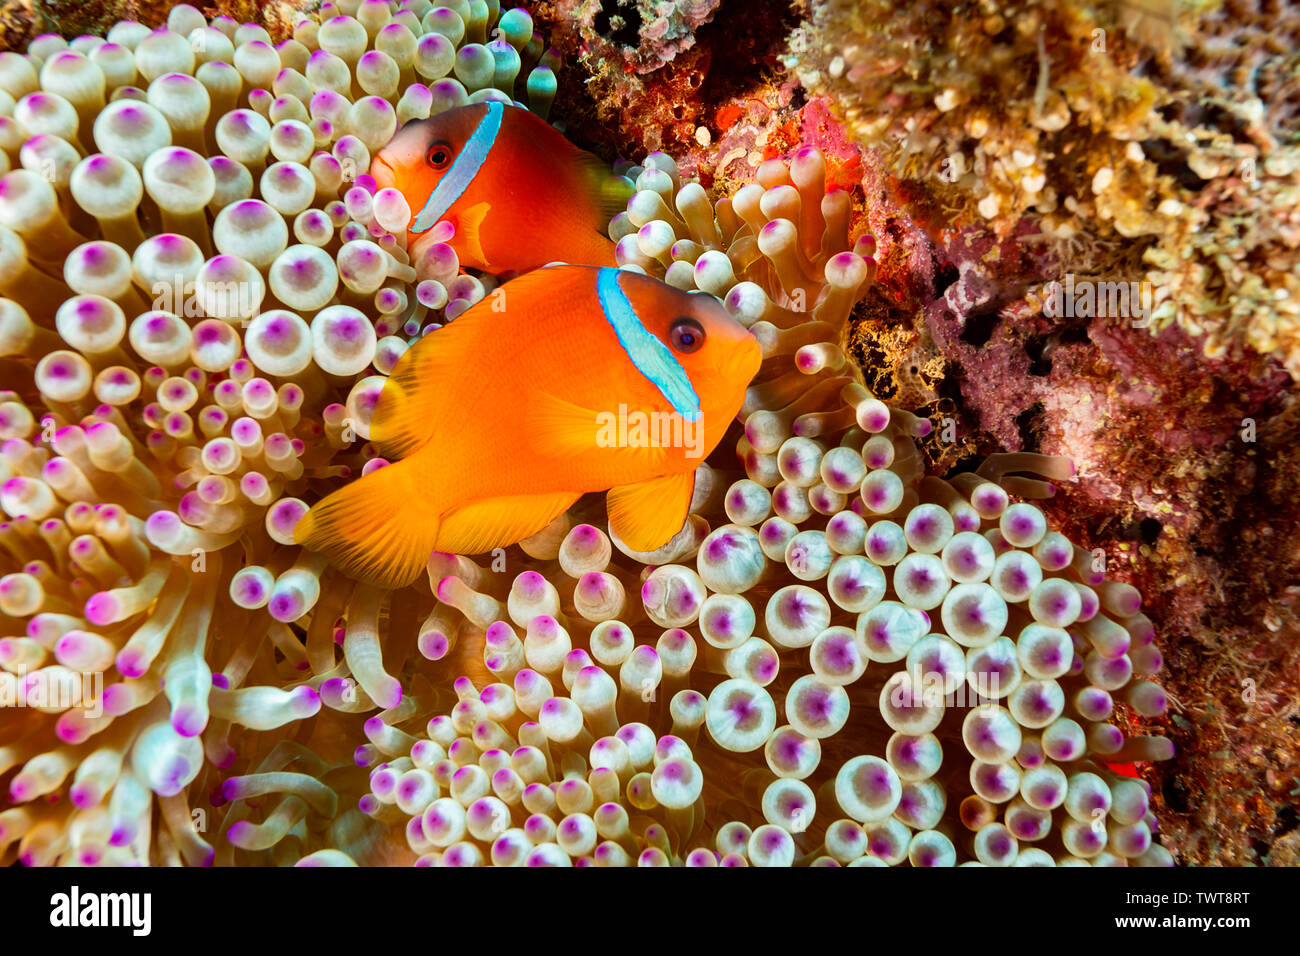 The clownfish, Amphiprion barberi, is a color variant of Amphiprion melanopus, and only since 2008 has been recognized as a unqiue species found in Fi Stock Photo